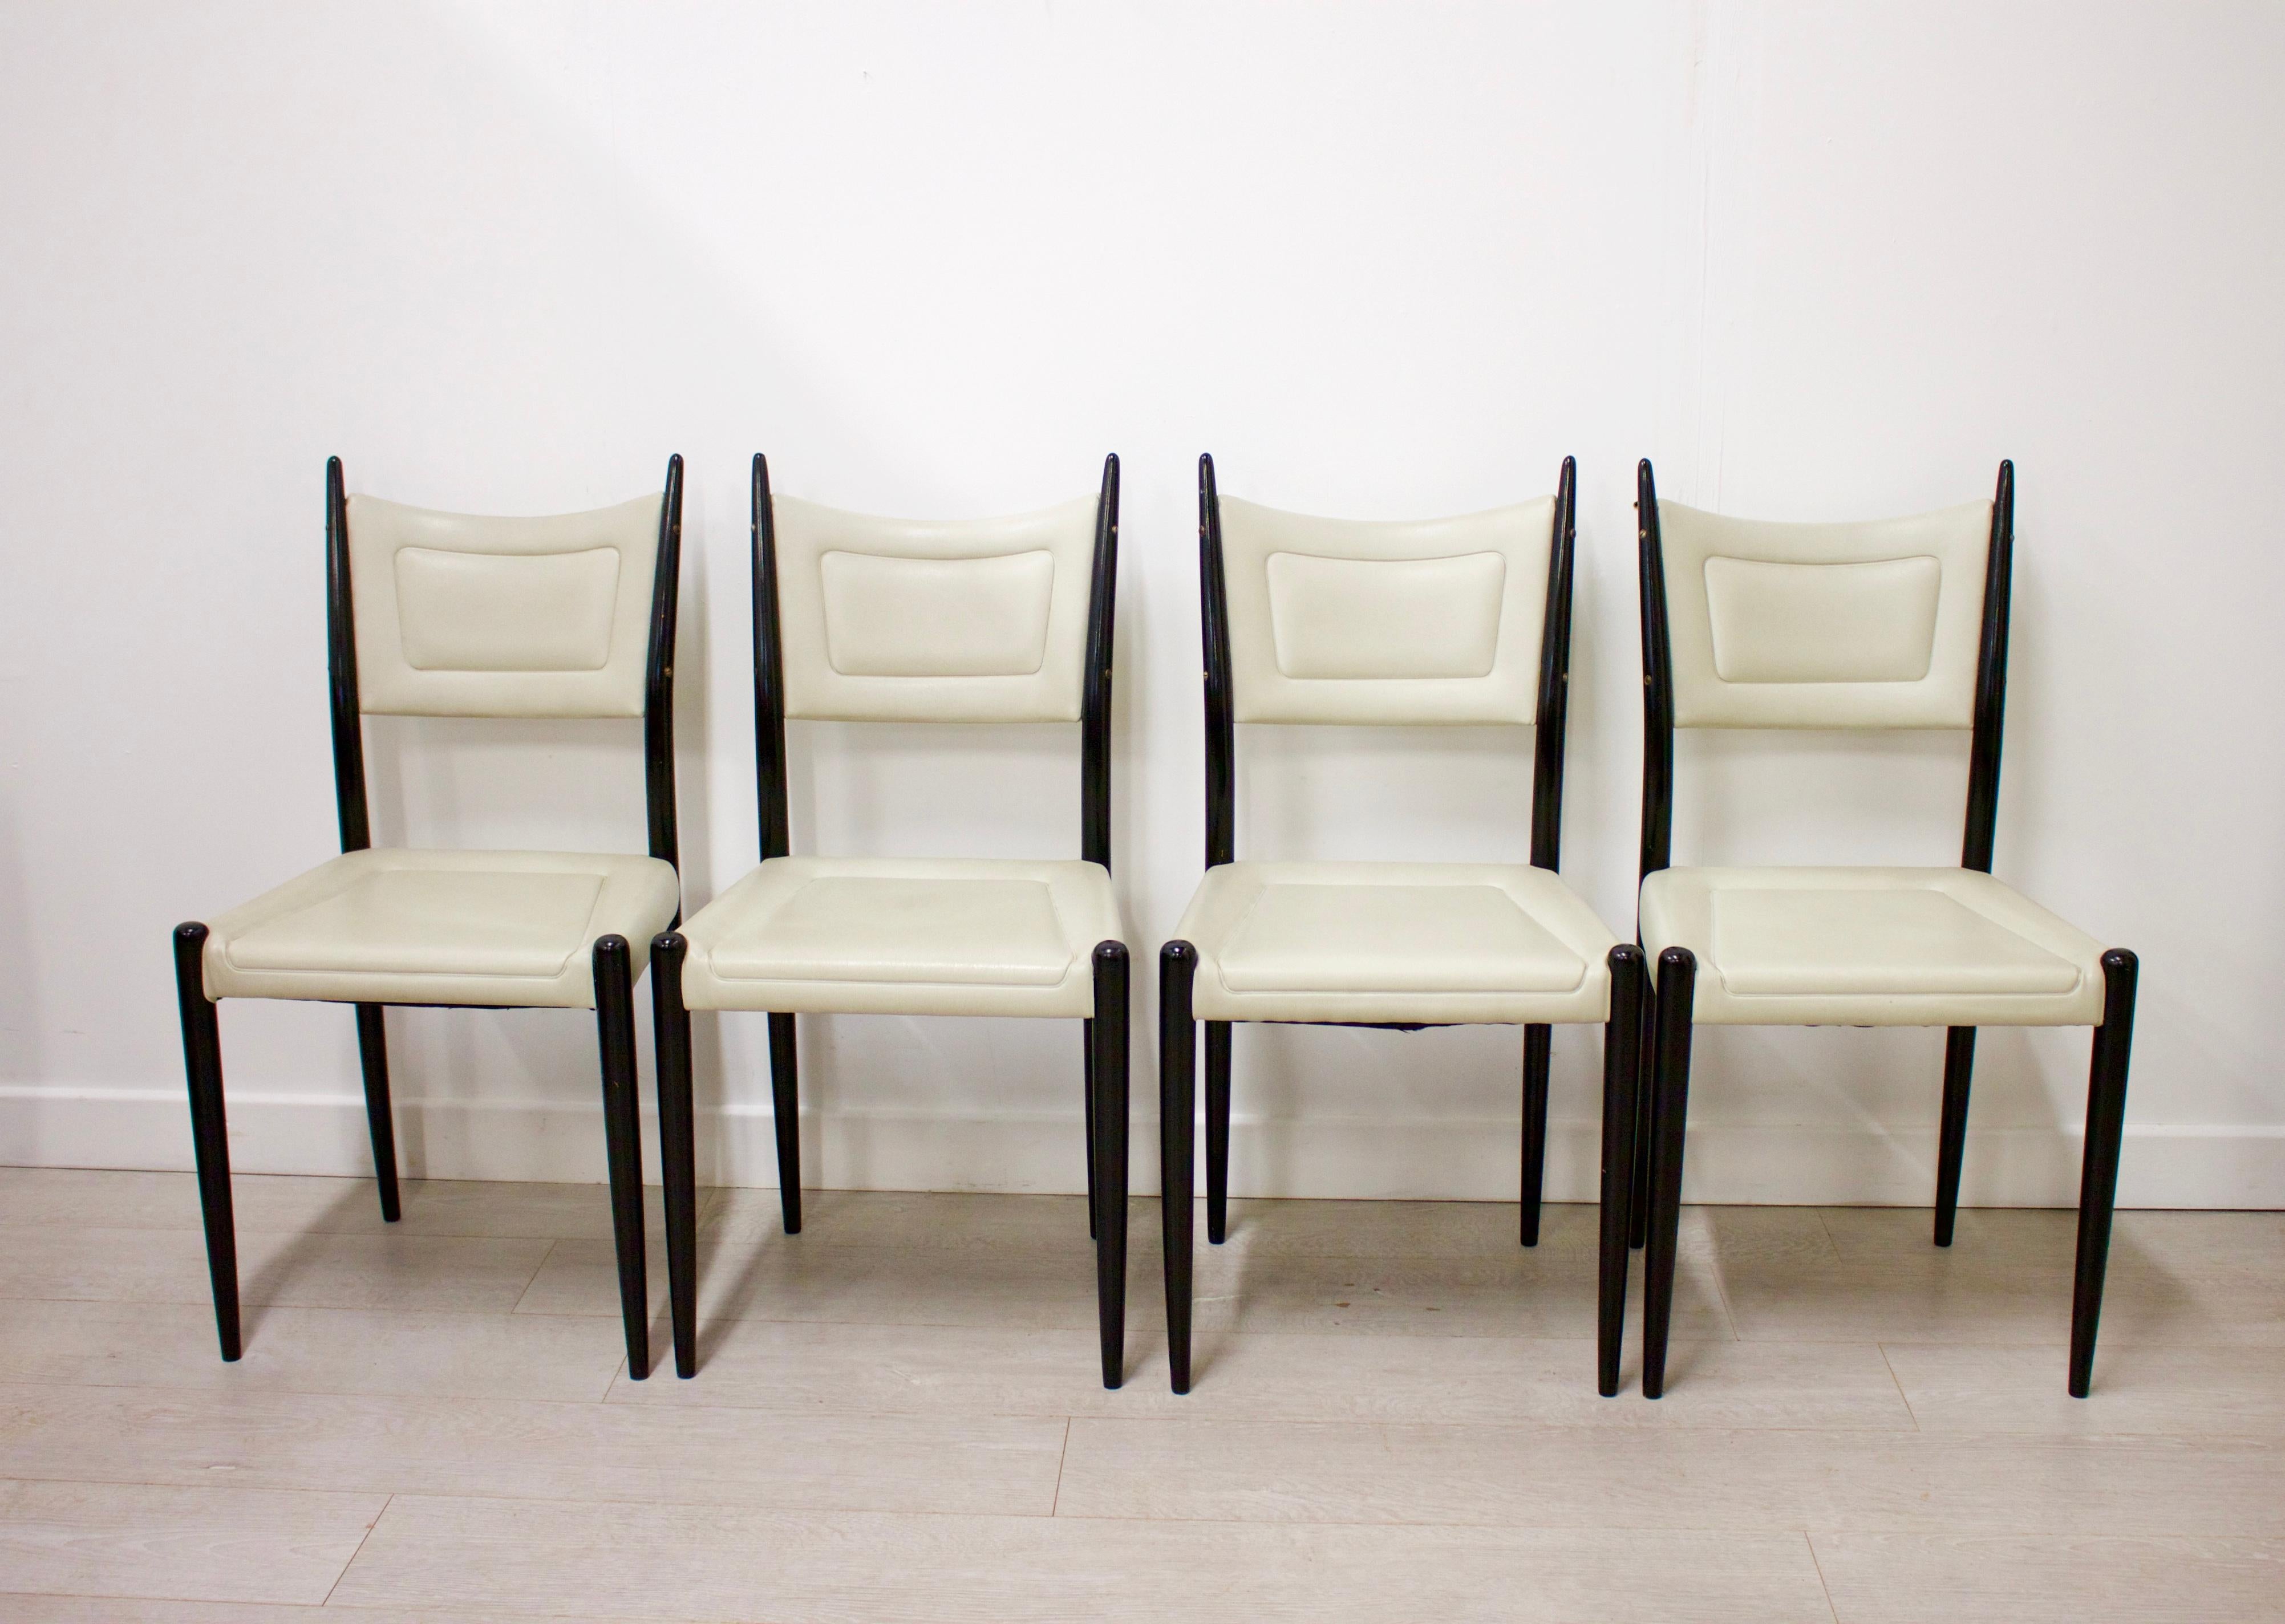 Teak Midcentury Tola Extending Dining Table and 4 Chairs by G-Plan, 1960s